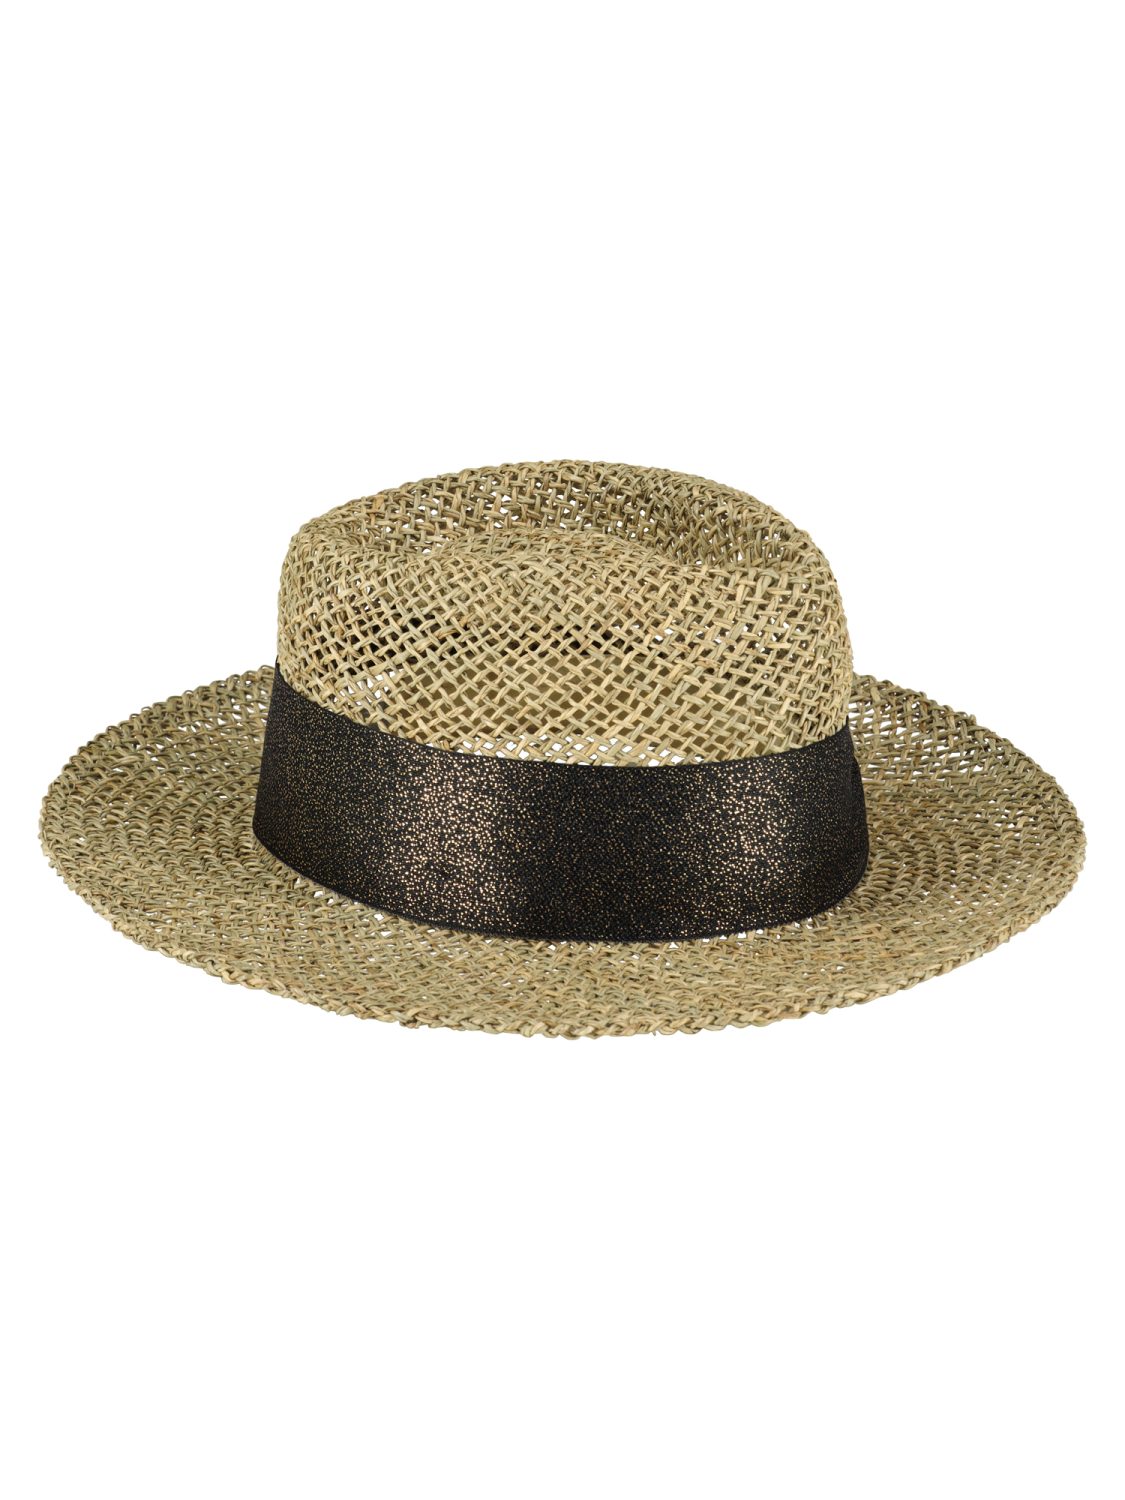 Seagrass hat_back